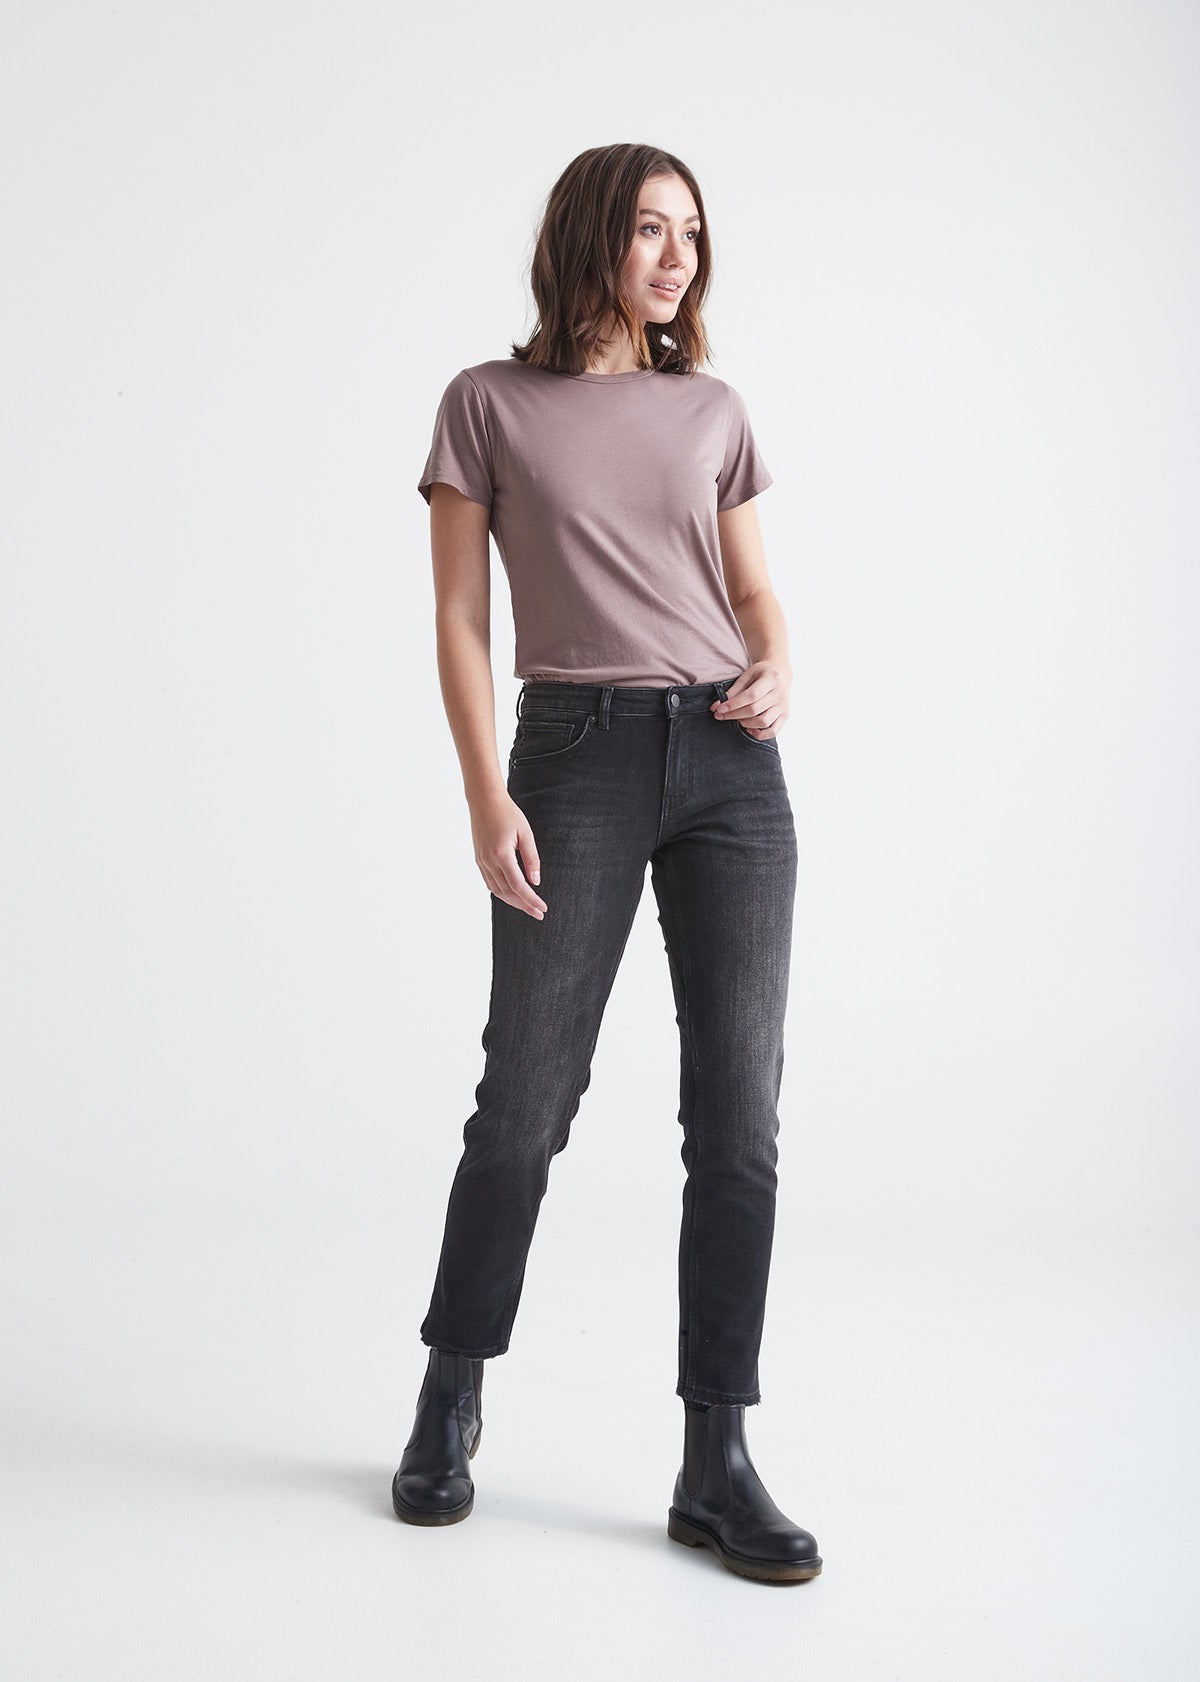 Jeans For Woman and Girls , Stretchable, Slimfit, Comfortable in